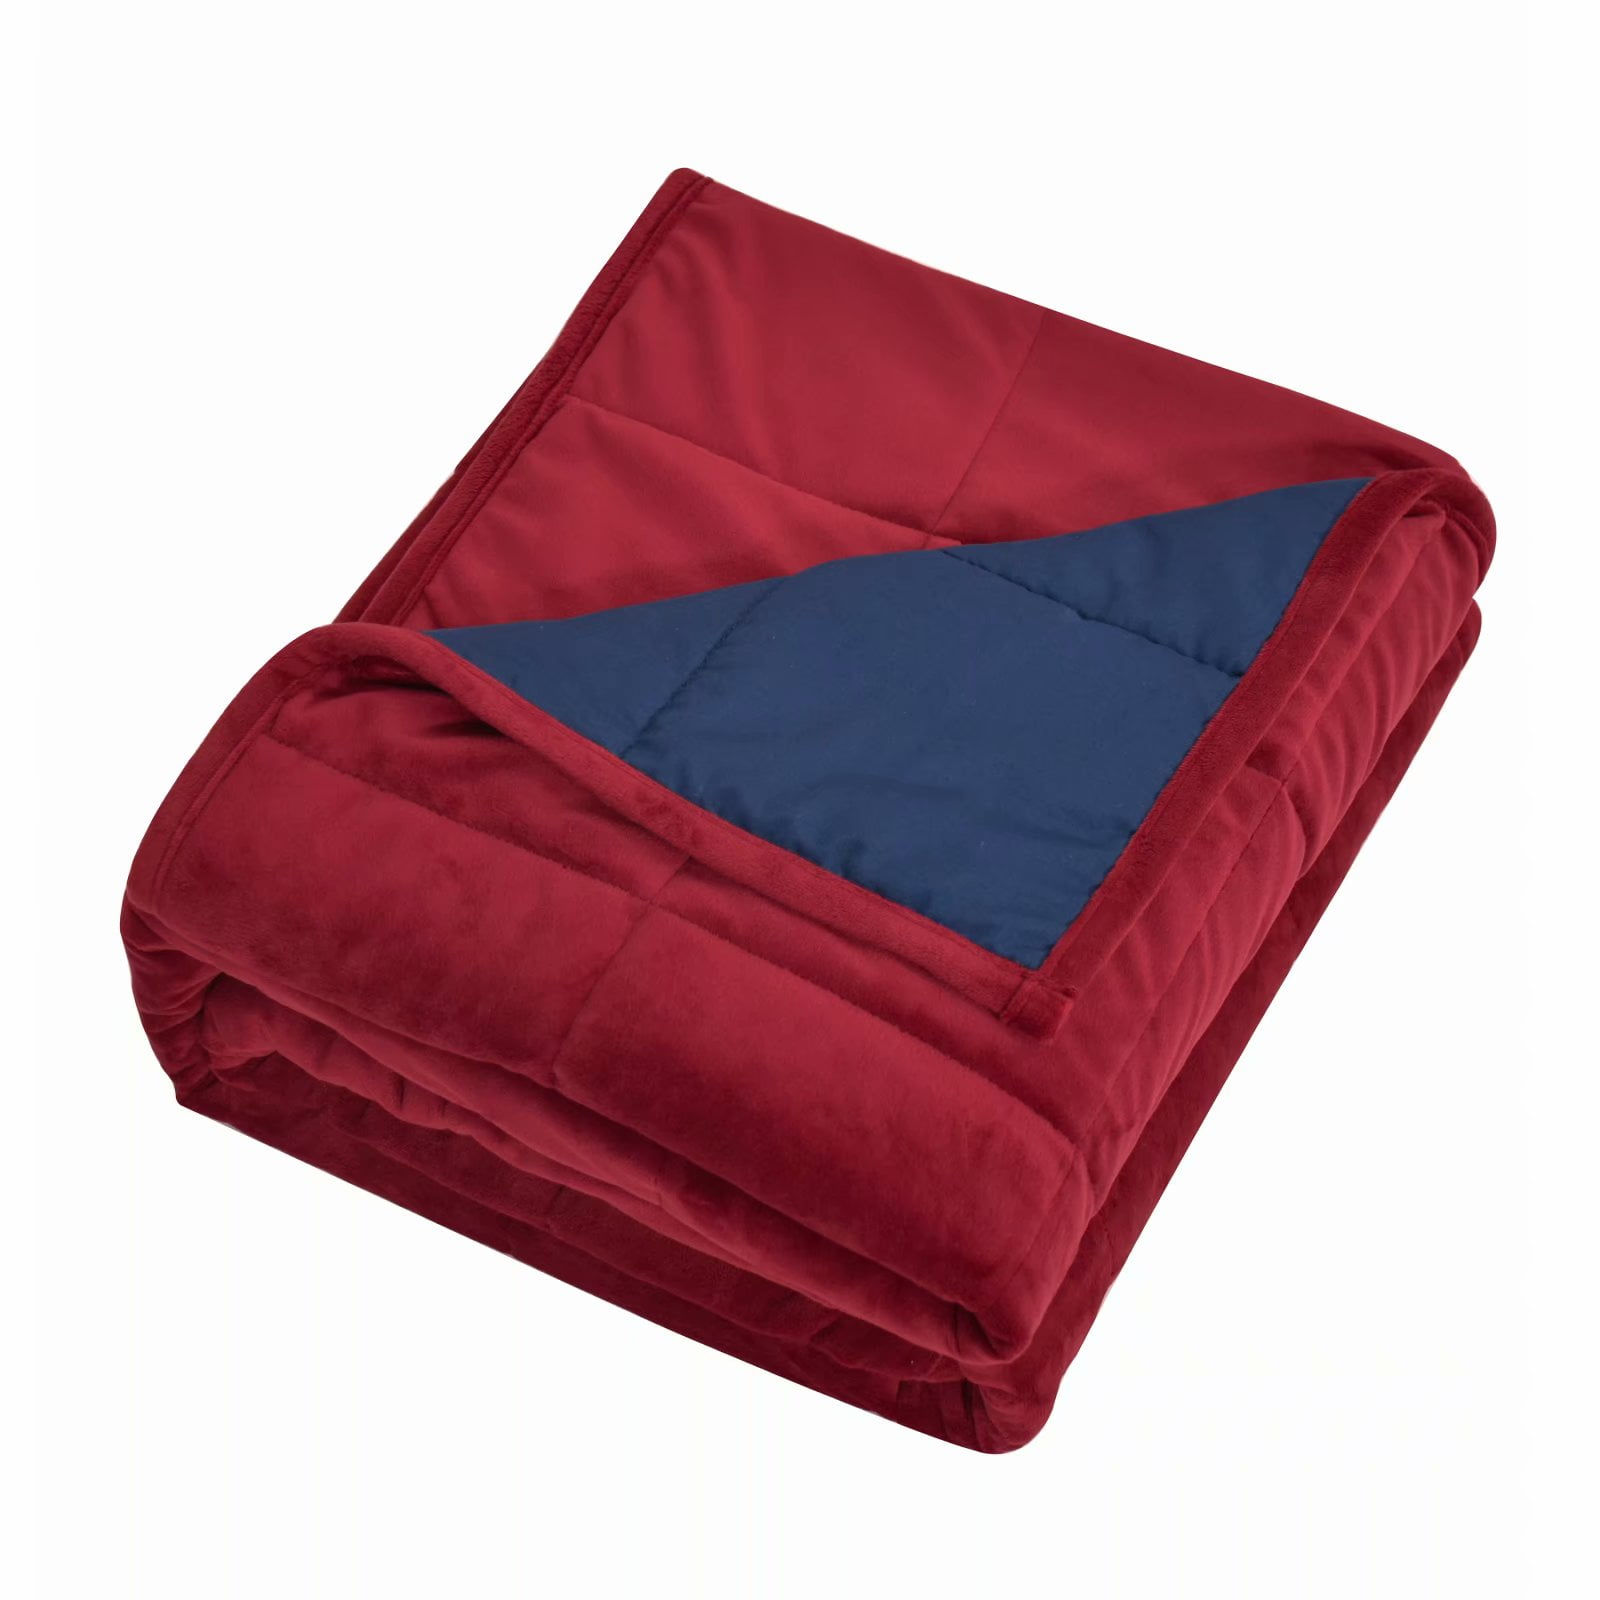 MerryLife Weighted Blanket 12 lbs 48" X 72" Twin Size without Duvet